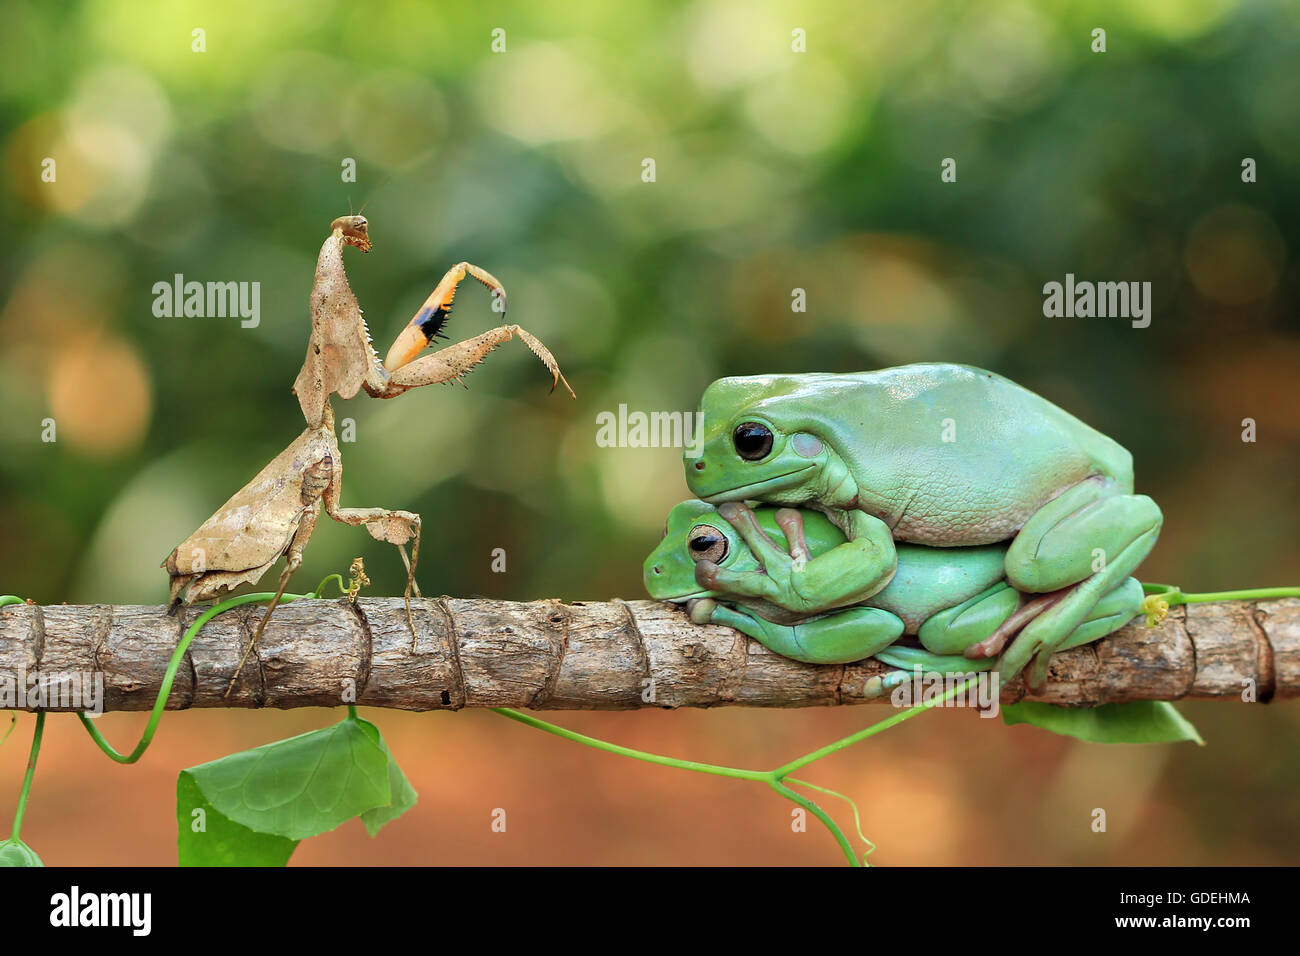 Dead leaf mantis and two tree frogs sitting on branch, Indonesia Stock Photo